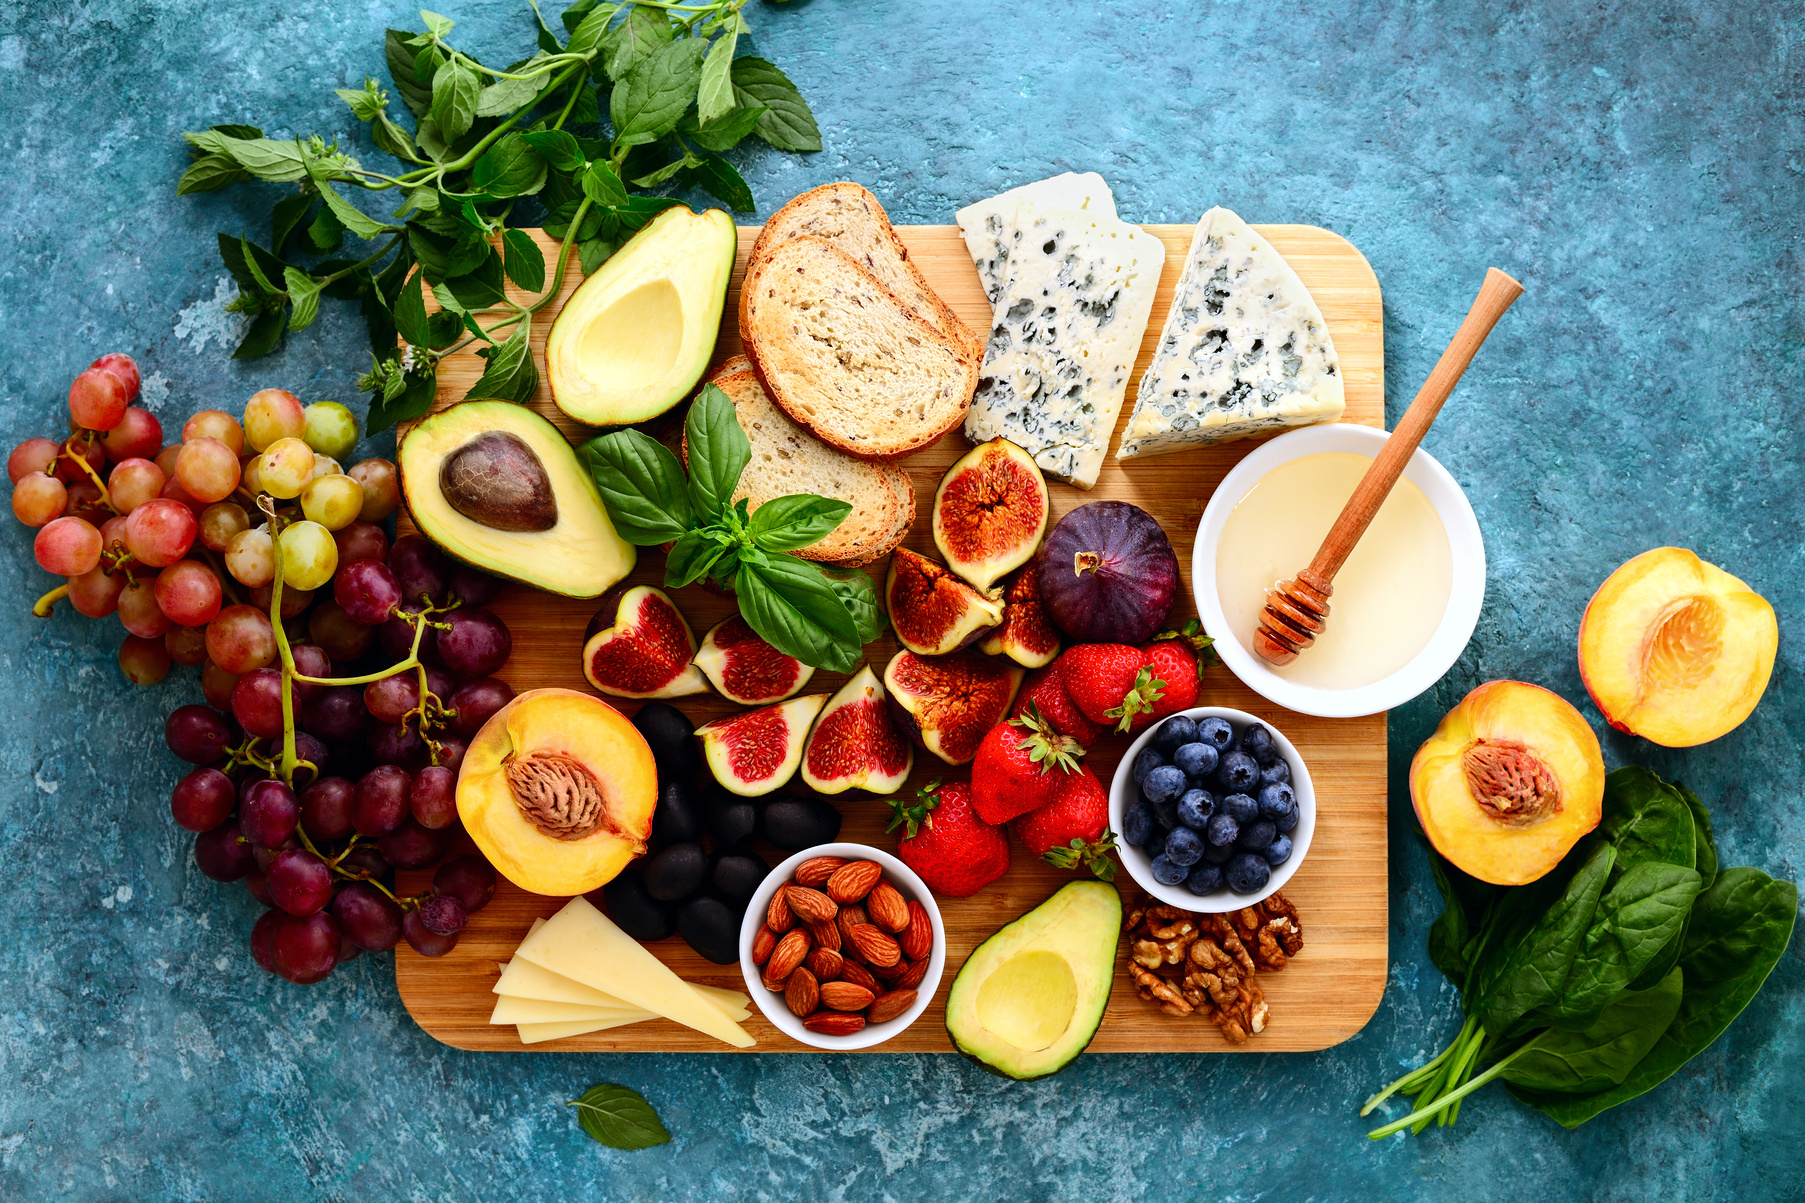 Assorted Healthy Cheese and Fruits Light Snack